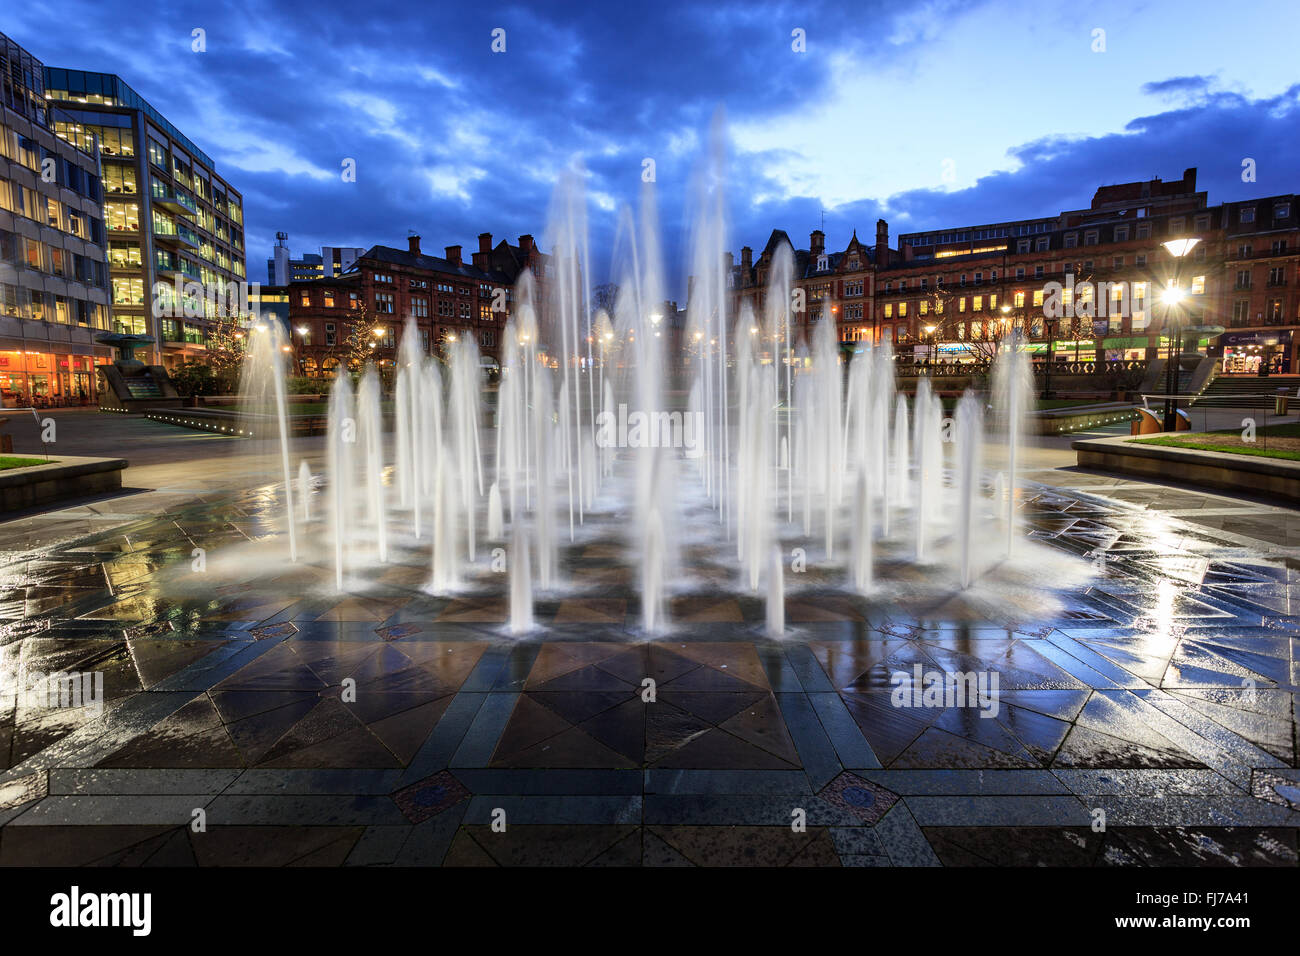 Fountain at millennium square in the city center of Sheffield, UK. Stock Photo